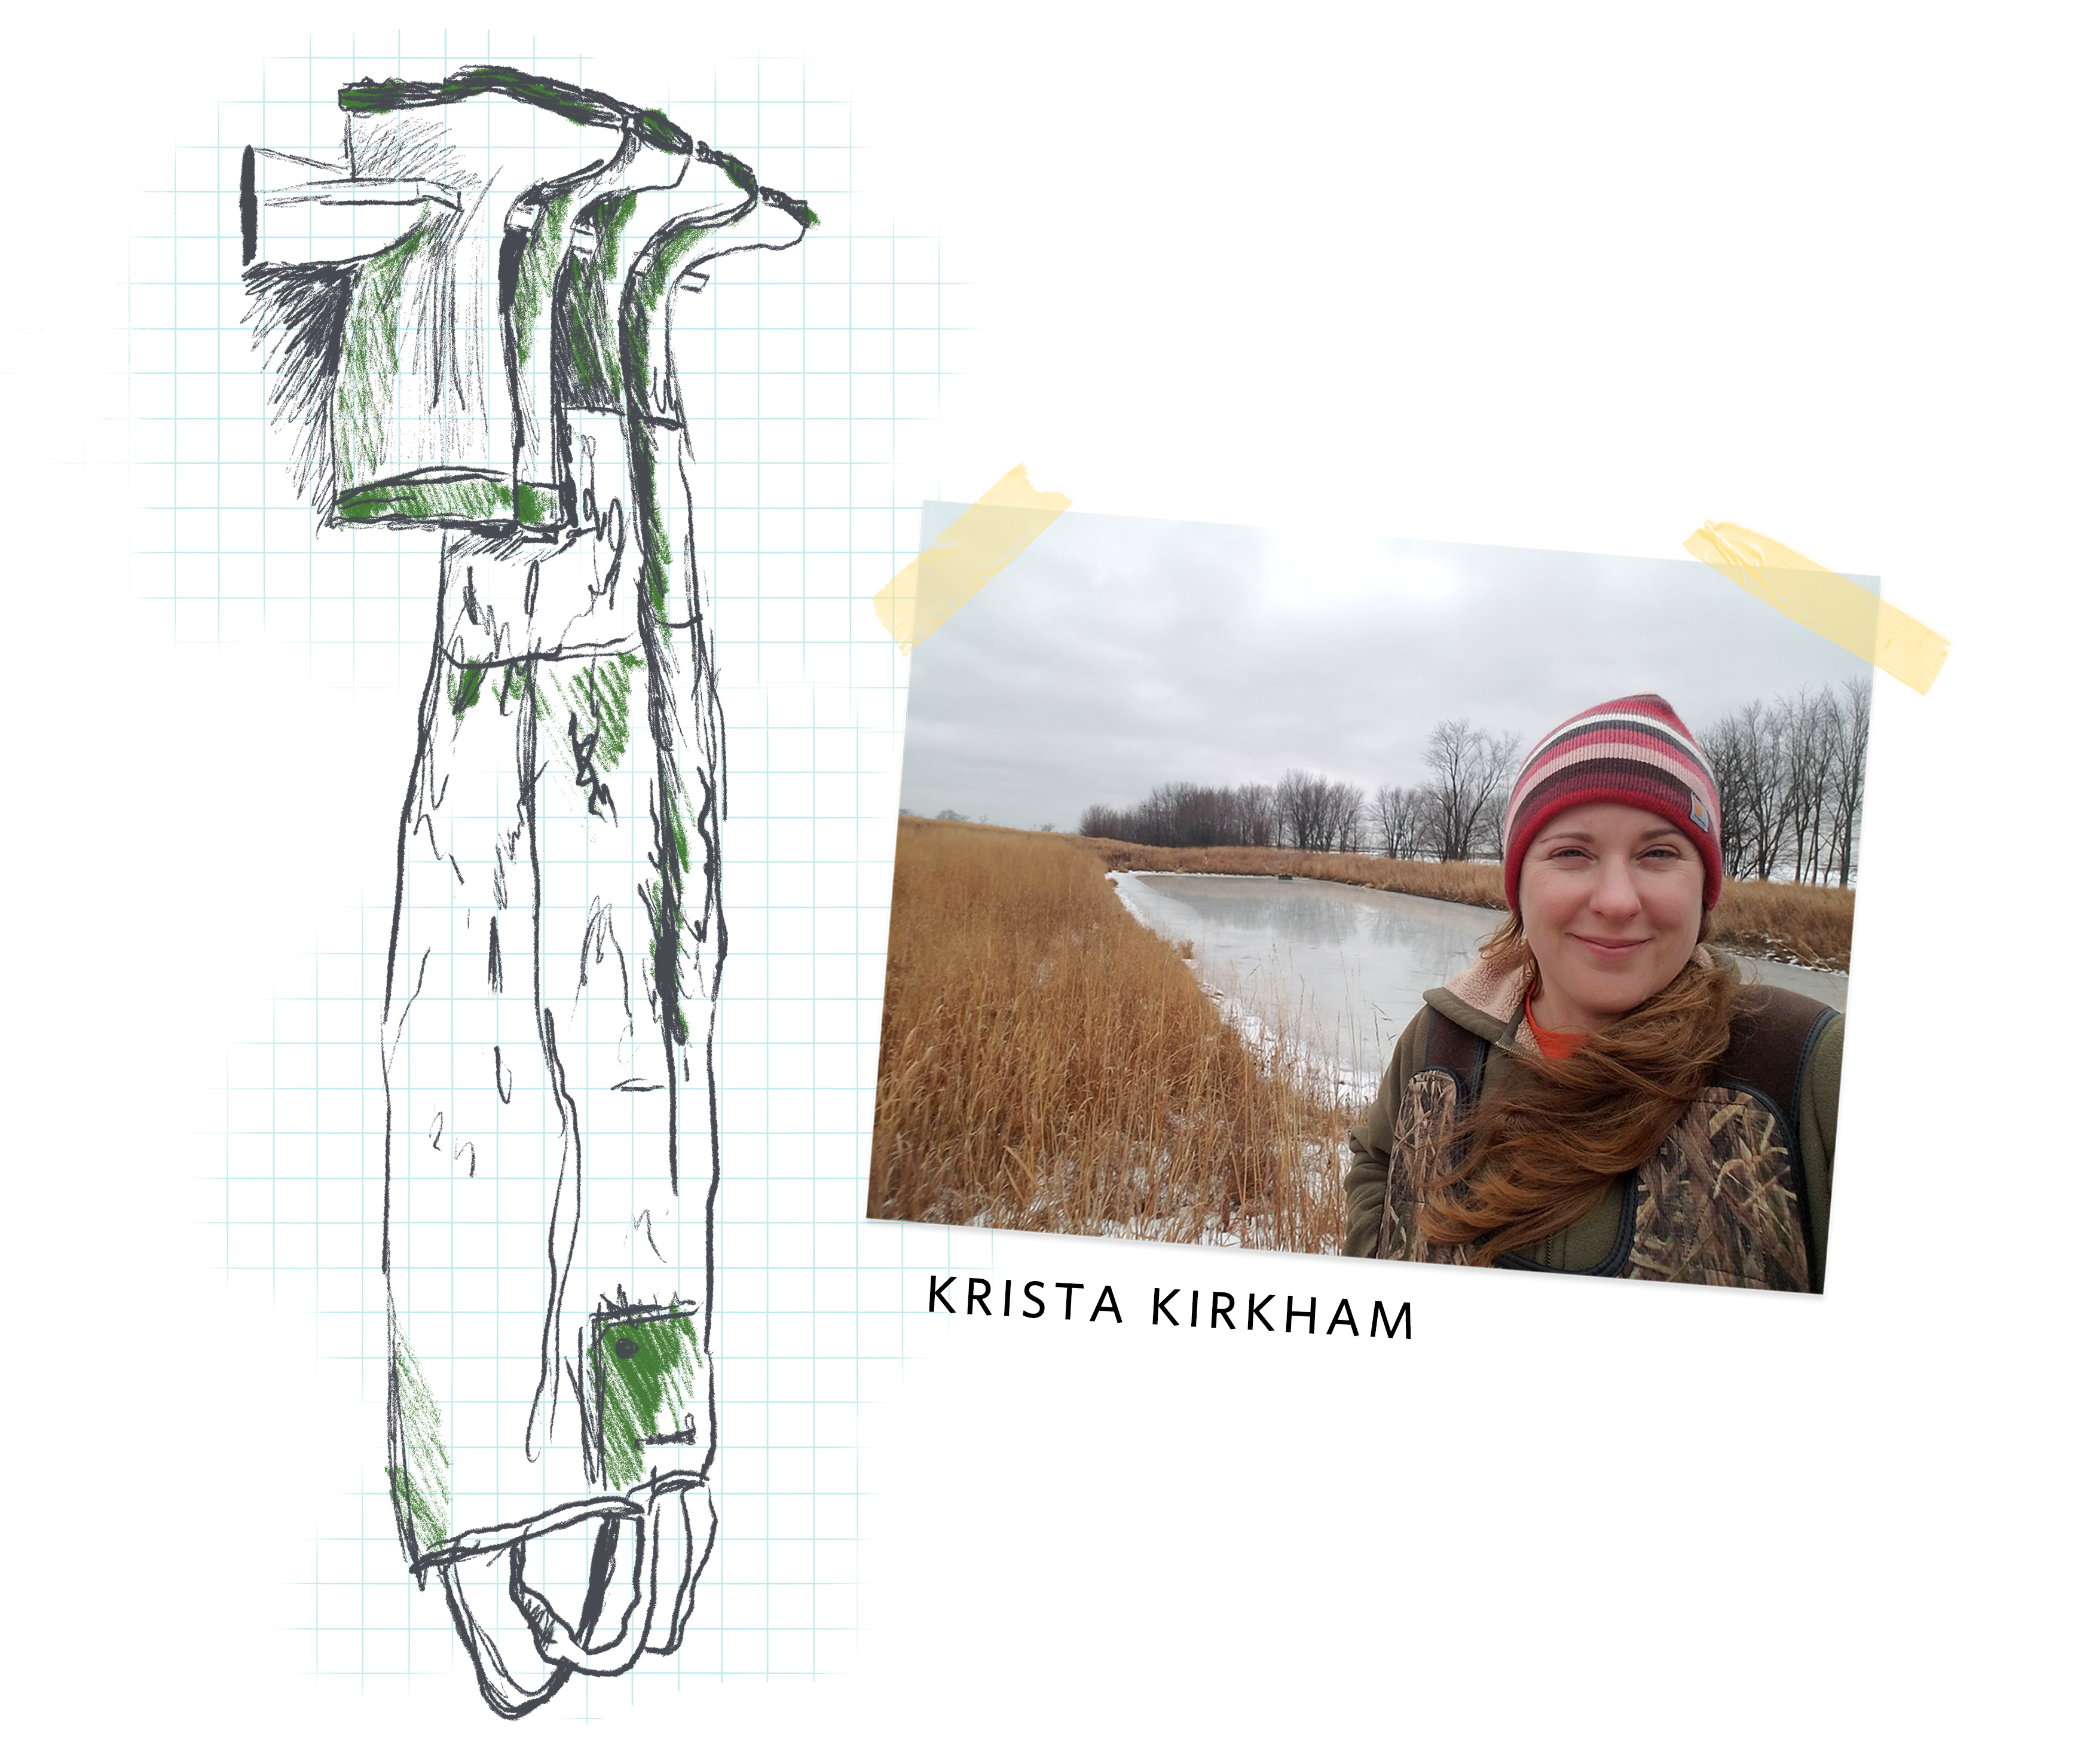 a sketchy illustration of waders hanging upside down, next to a photo of a smiling woman in a wetland